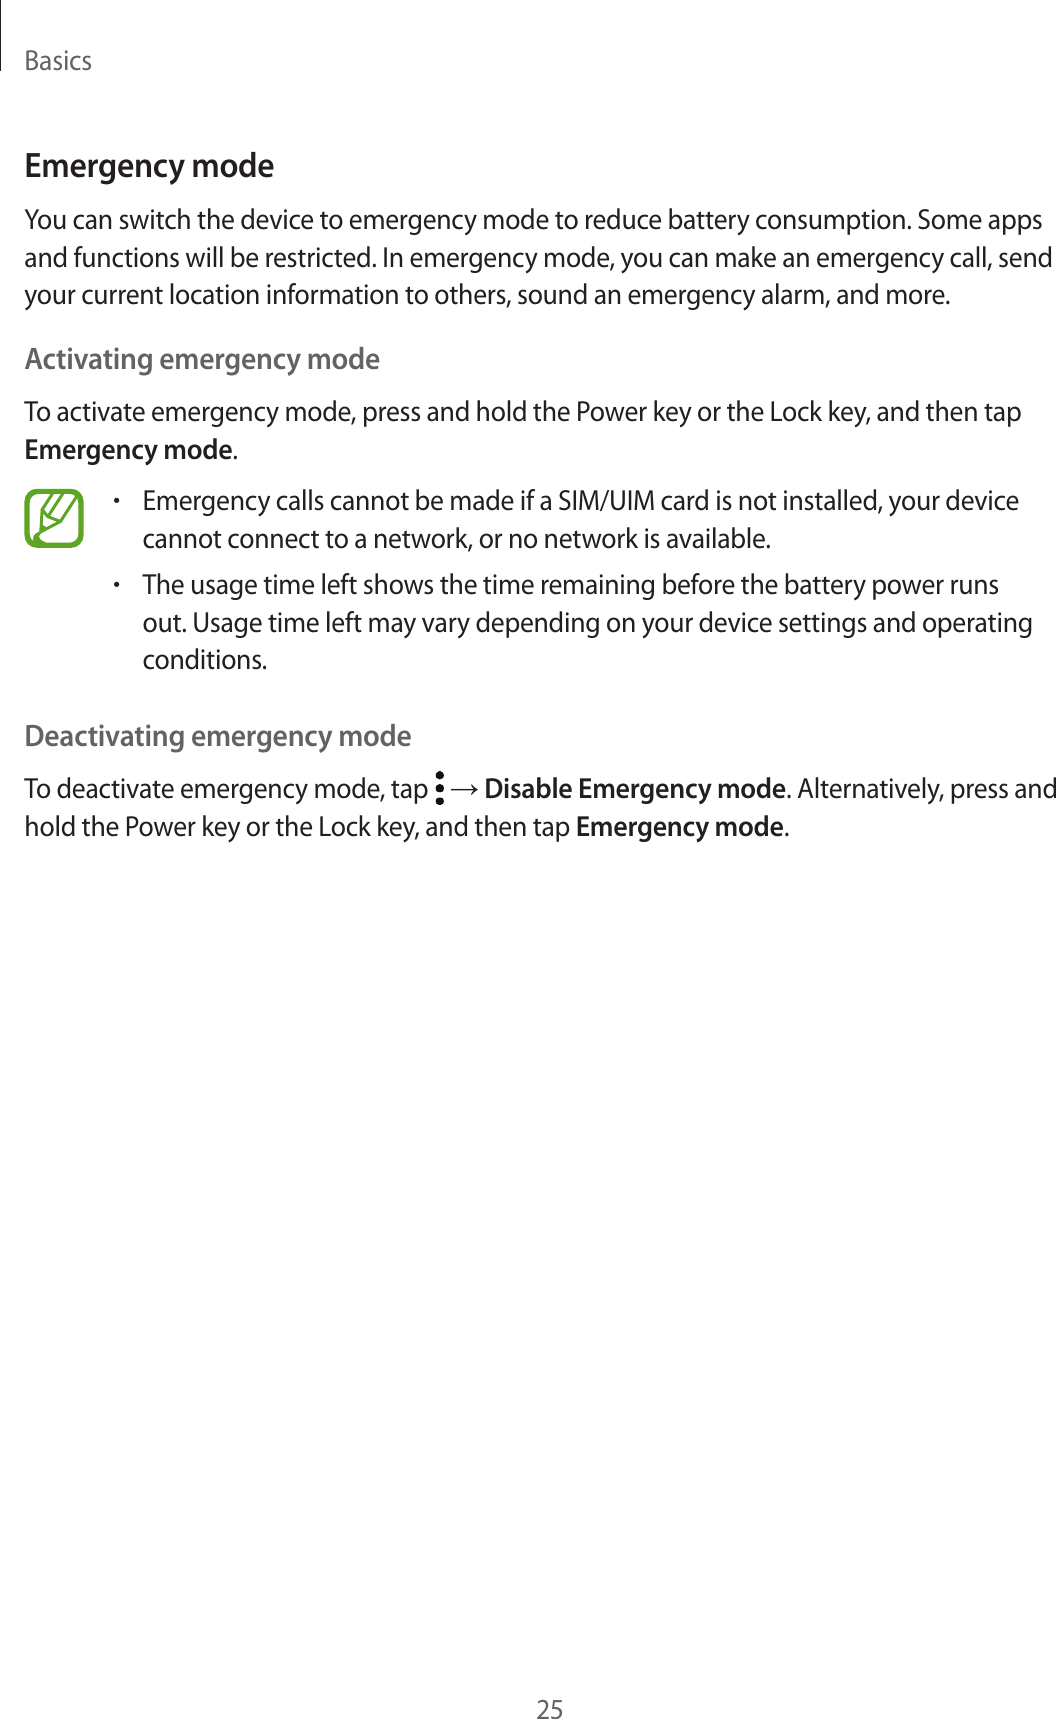 Basics25Emergency modeYou can switch the device to emergency mode to reduce battery consumption. Some apps and functions will be restricted. In emergency mode, you can make an emergency call, send your current location information to others, sound an emergency alarm, and more.Activating emergency modeTo activate emergency mode, press and hold the Power key or the Lock key, and then tap Emergency mode.•Emergency calls cannot be made if a SIM/UIM card is not installed, your device cannot connect to a network, or no network is available.•The usage time left shows the time remaining before the battery power runs out. Usage time left may vary depending on your device settings and operating conditions.Deactivating emergency modeTo deactivate emergency mode, tap   → Disable Emergency mode. Alternatively, press and hold the Power key or the Lock key, and then tap Emergency mode.